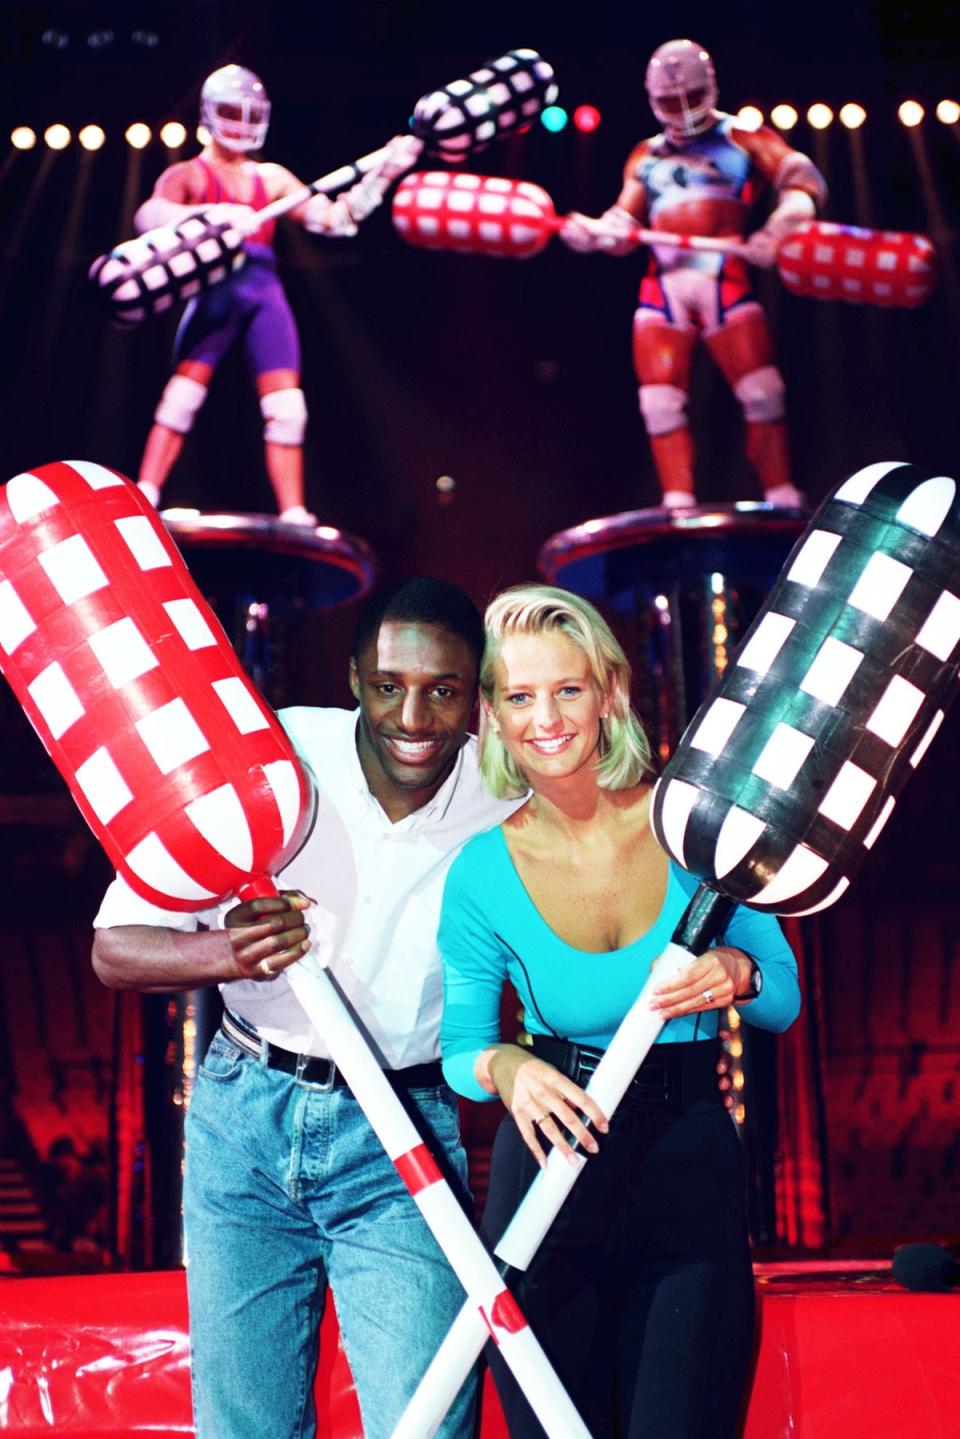 John Fashanu and Ulrika Jonsson, were the hosts of ‘Gladiators’ during its run on ITV (PA) (PA Archive)